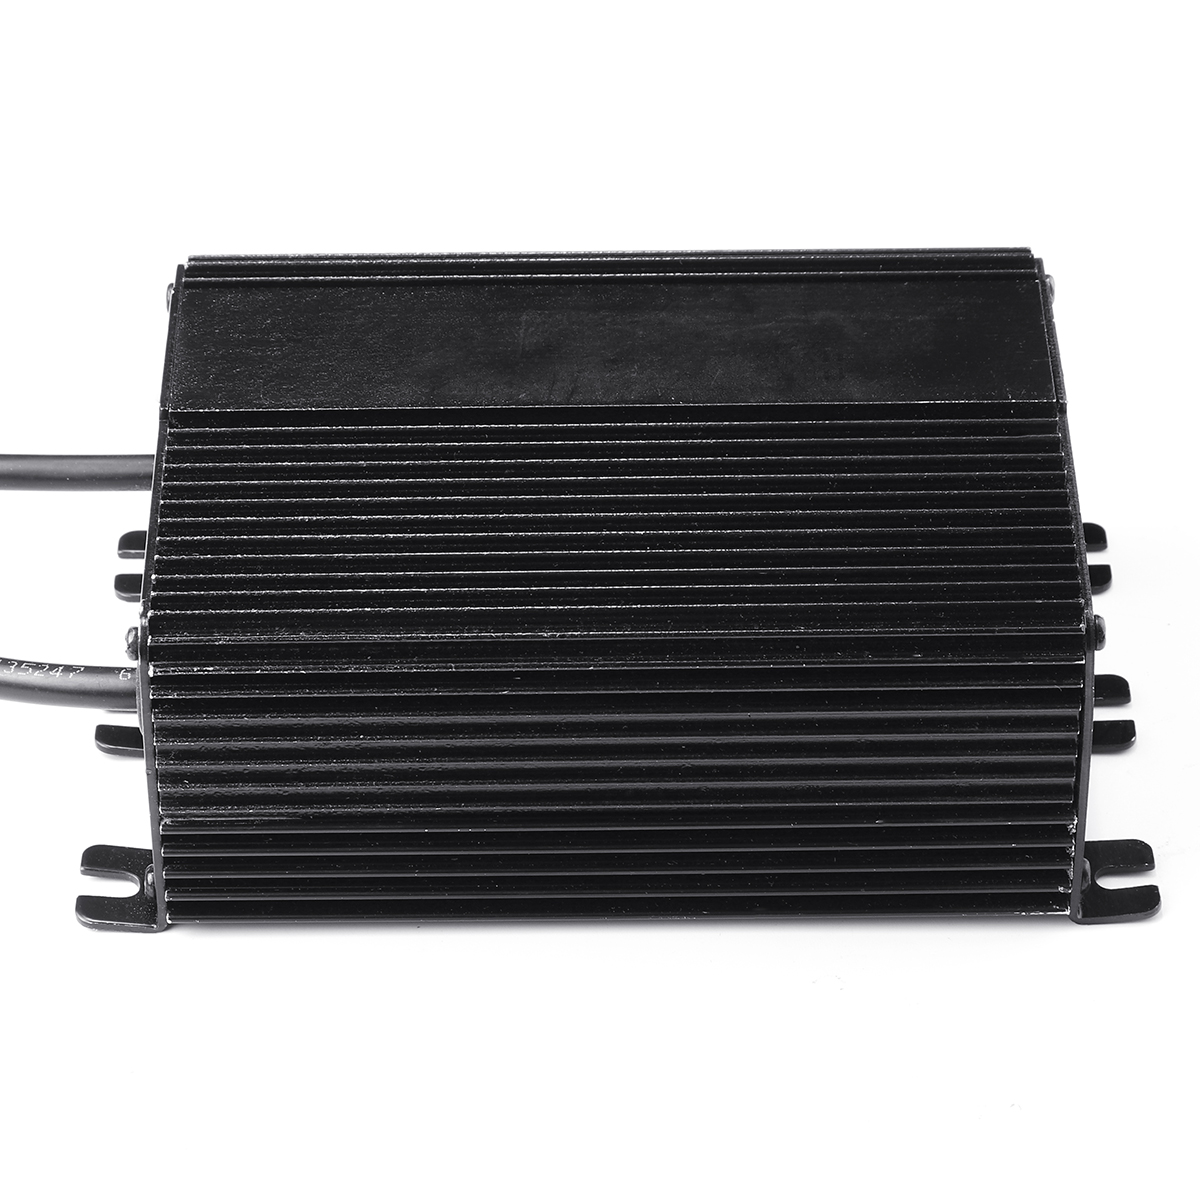 Find 70/100/110/150/250/400W Electronic Ballast Gas Air Ballast for NG High pressure Sodium Lamp for Sale on Gipsybee.com with cryptocurrencies